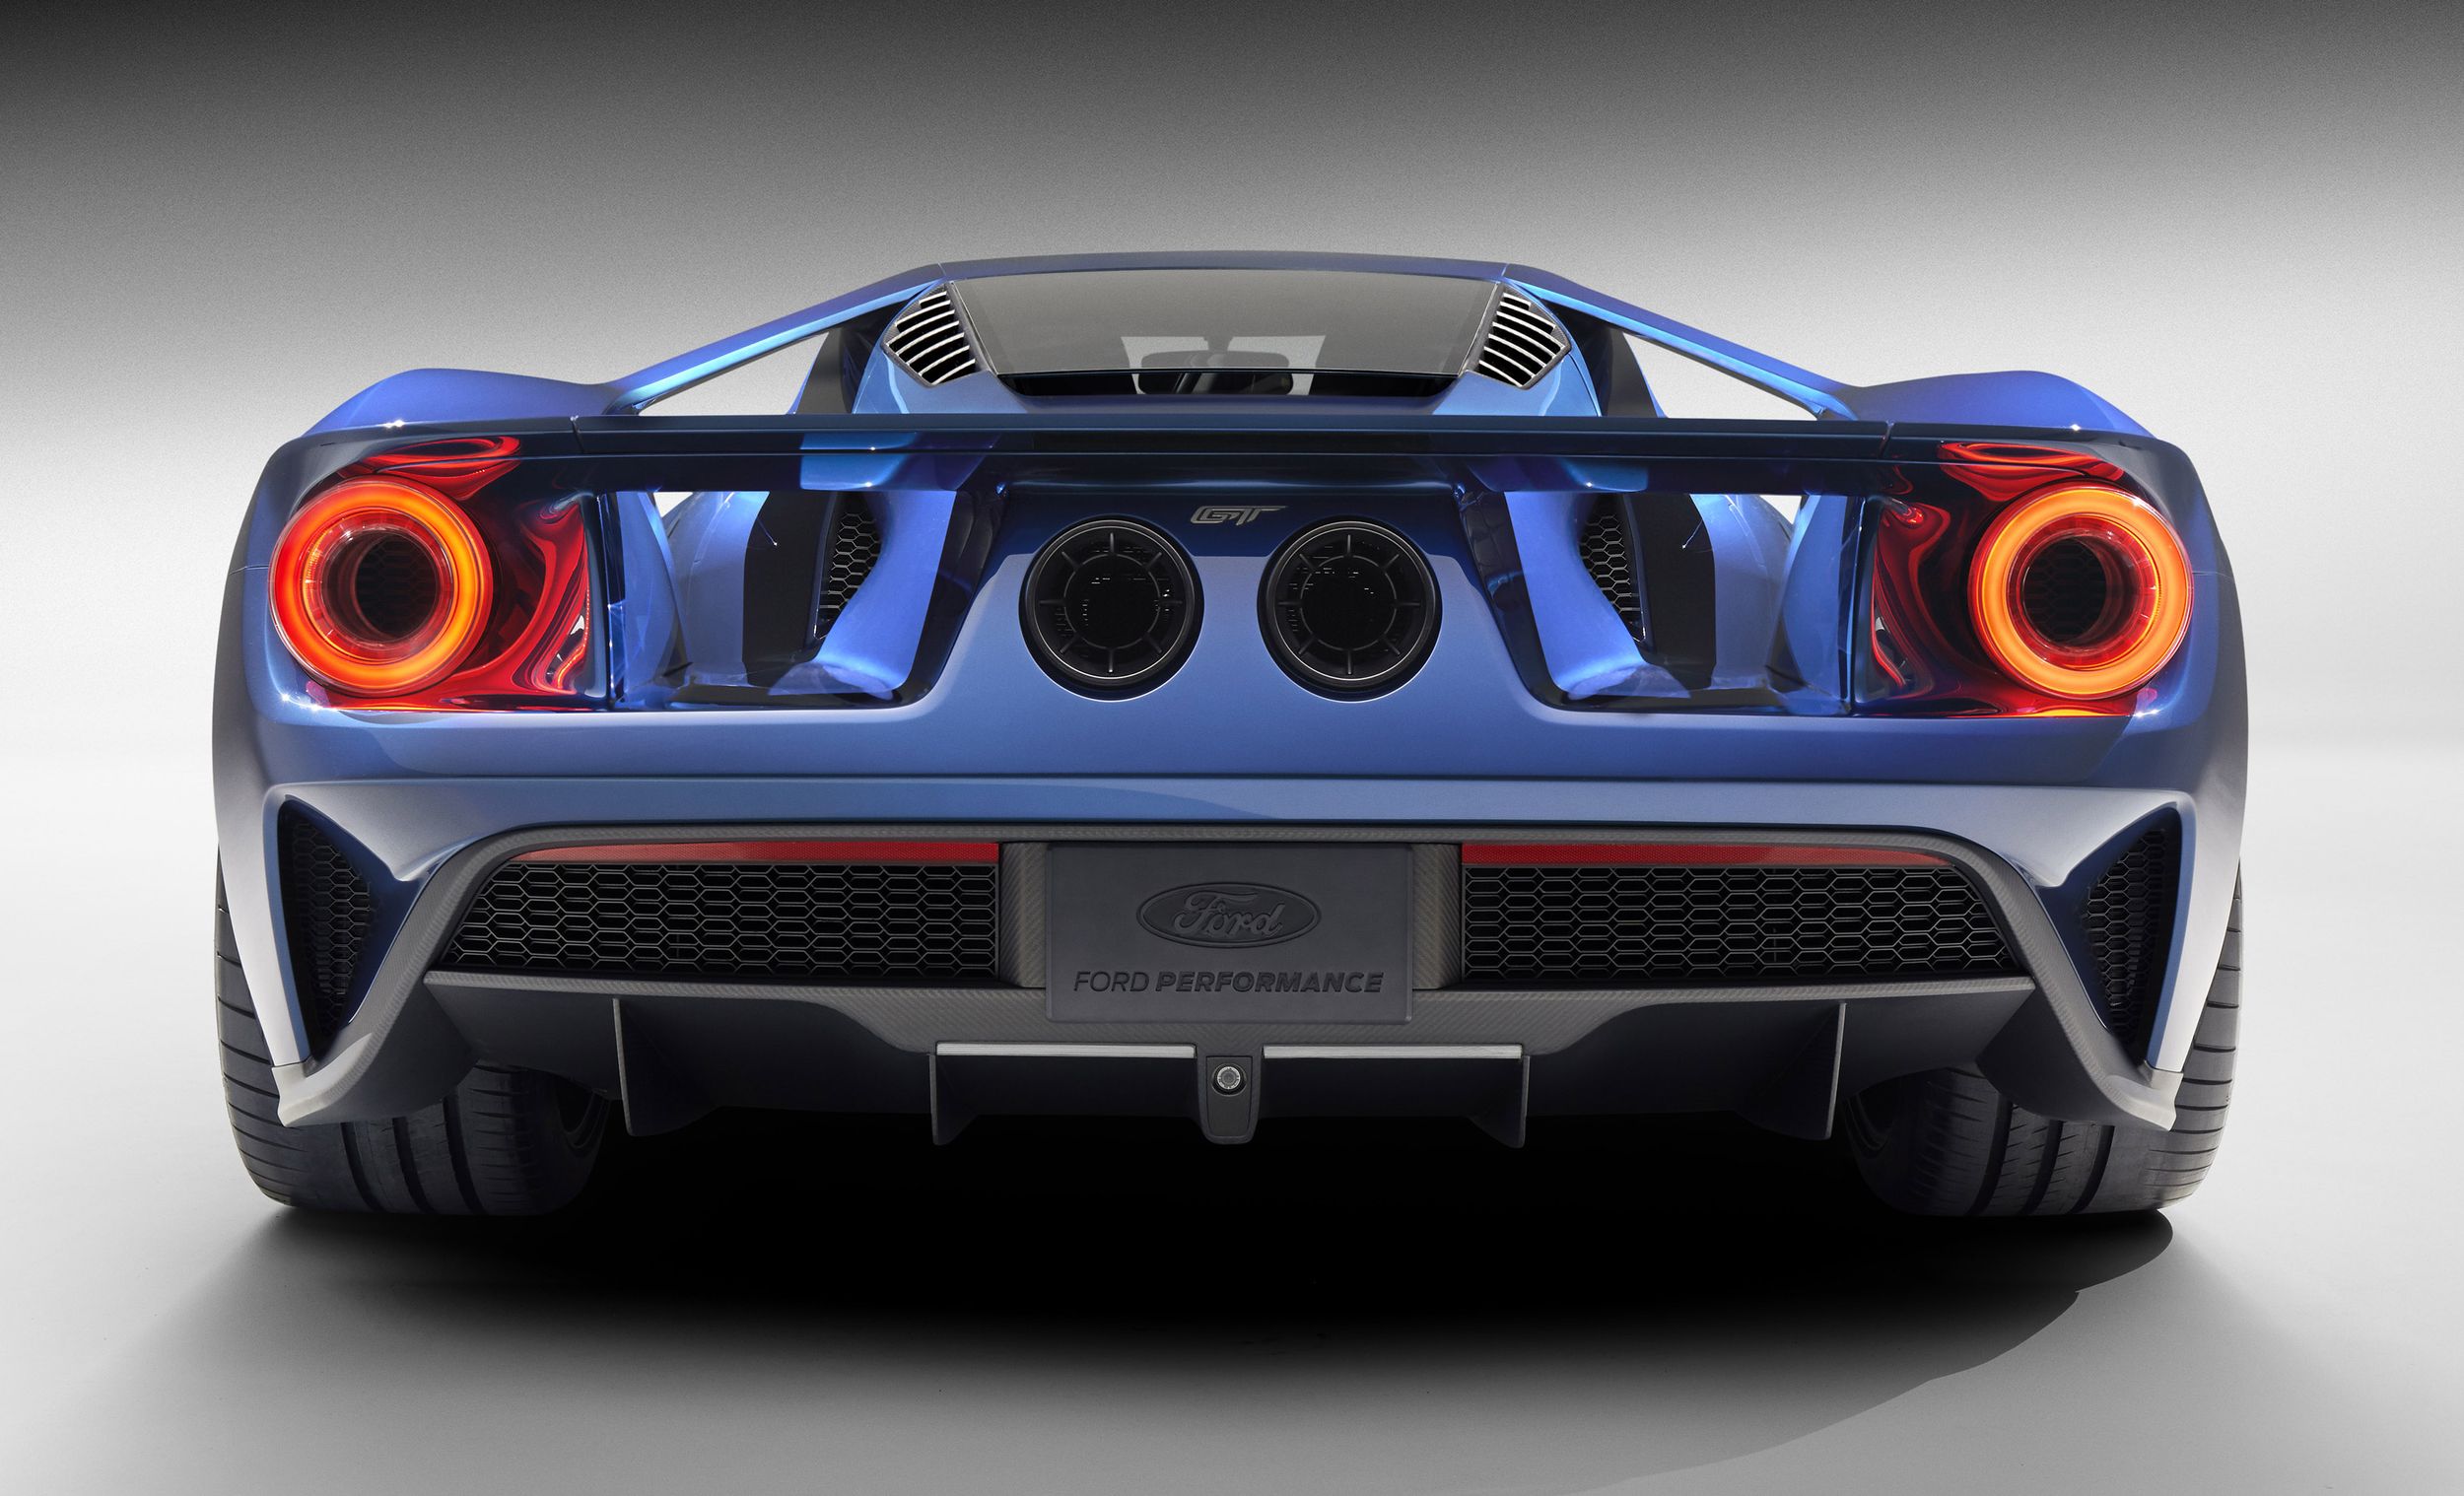 The all-new carbon-fiber Ford GT supercar features fully active aerodynamic components to improve braking, handling and stability, including an active rear spoiler keyed to both speed and driver input.